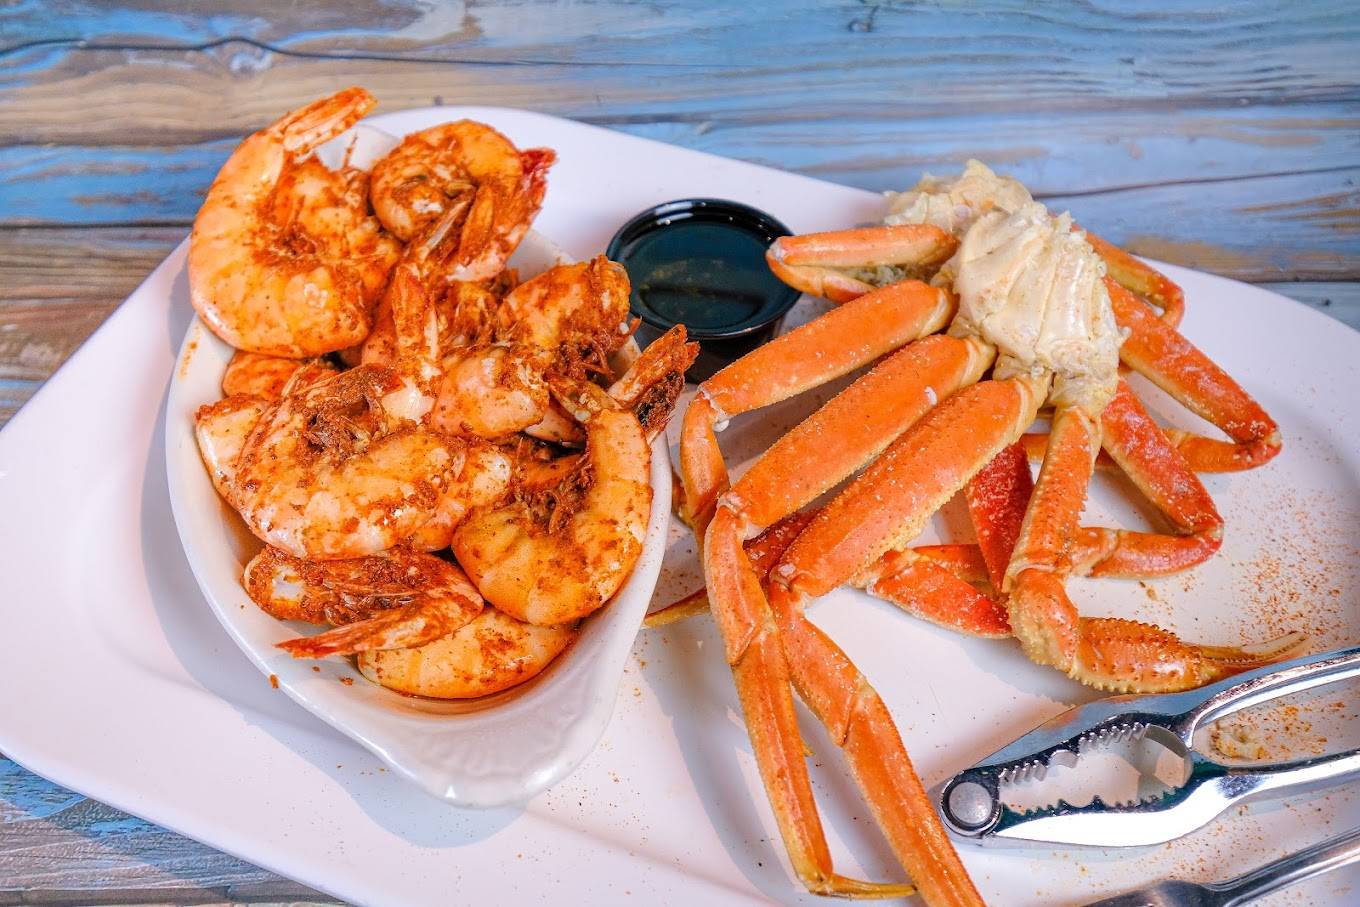 The Dunes Restaurant - best seafood in Nags Head